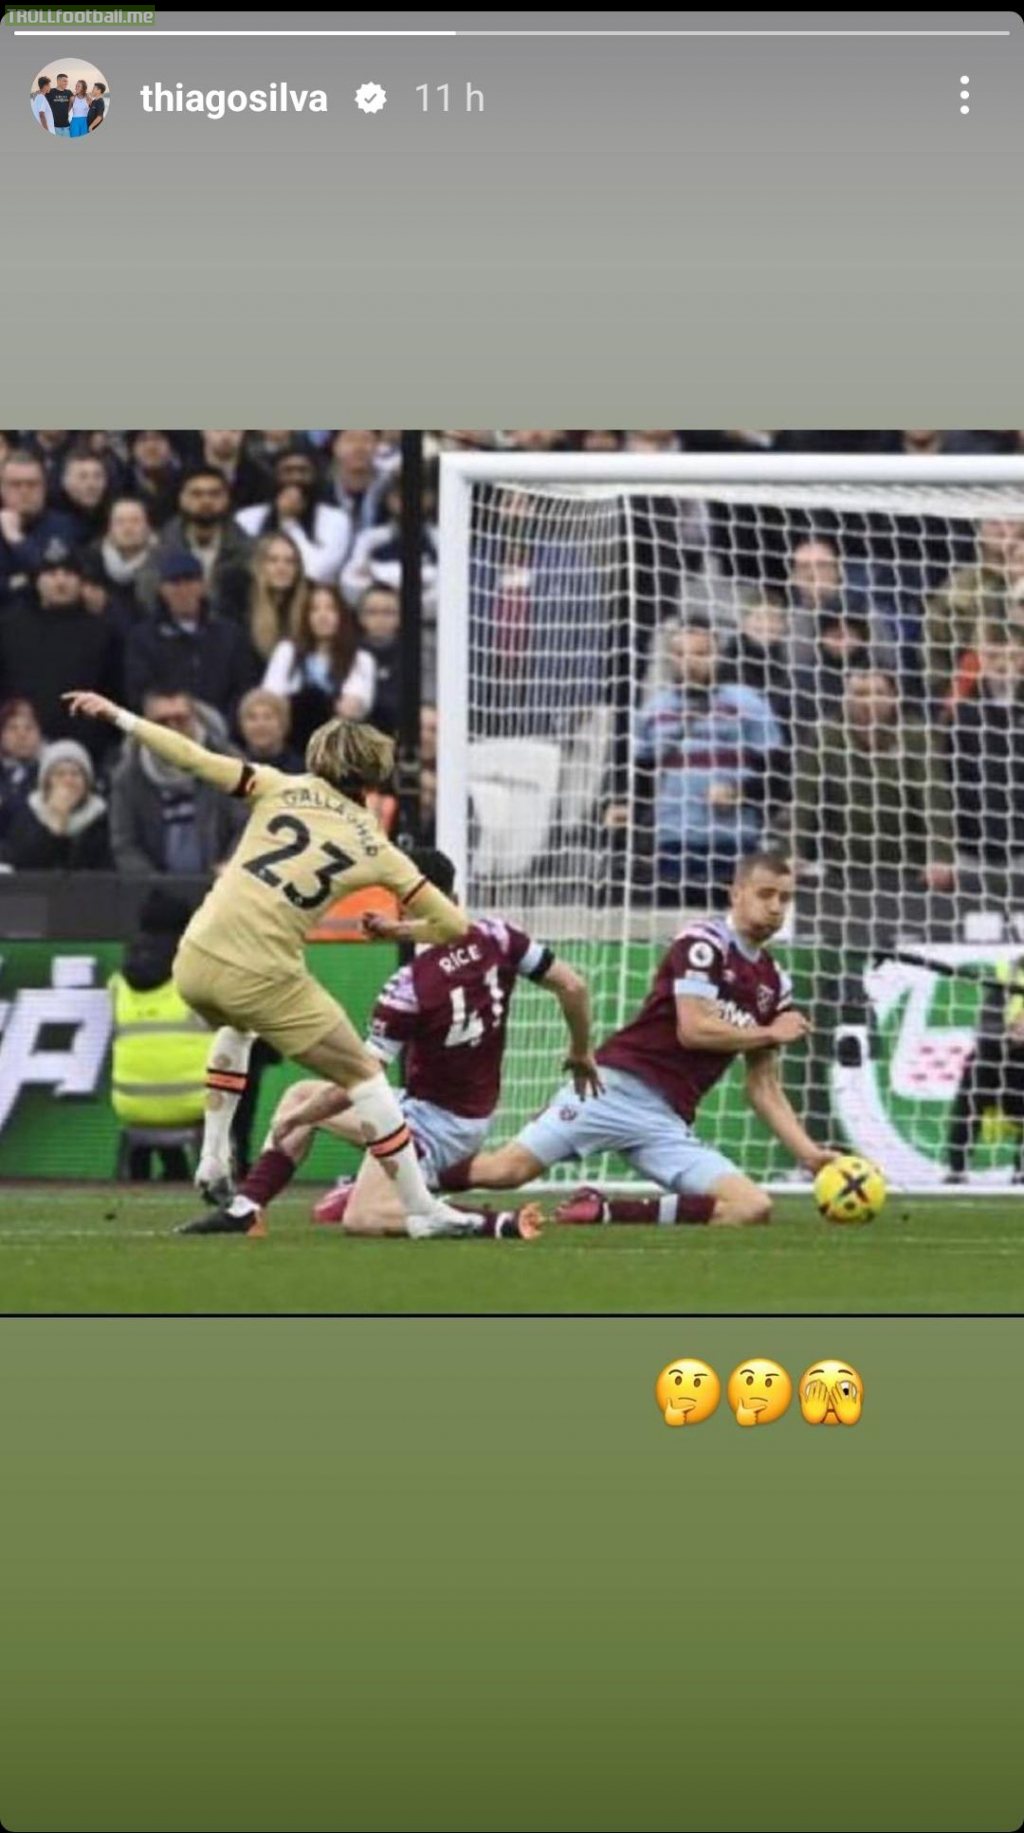 Thiago Silva on Instagram after yesterday's match against West ham